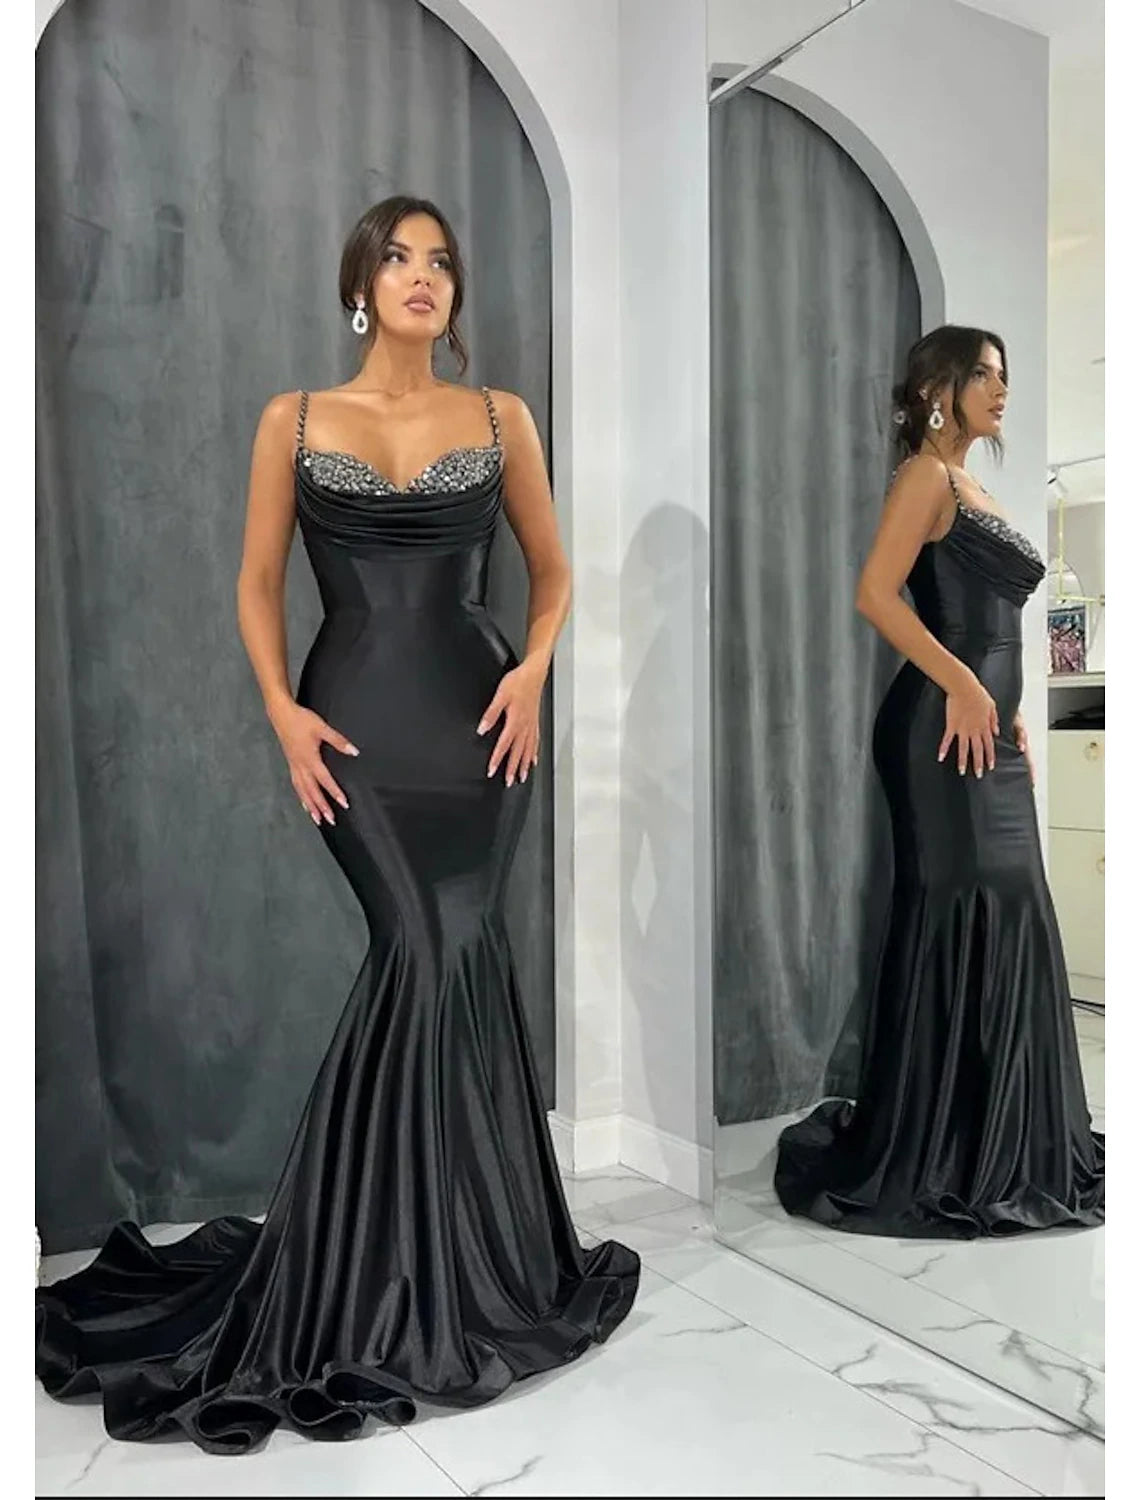 Mermaid / Trumpet Evening Gown Open Back Dress Formal Evening Black Tie Gala Court Train Sleeveless Sweetheart Satin with Glitter Crystals